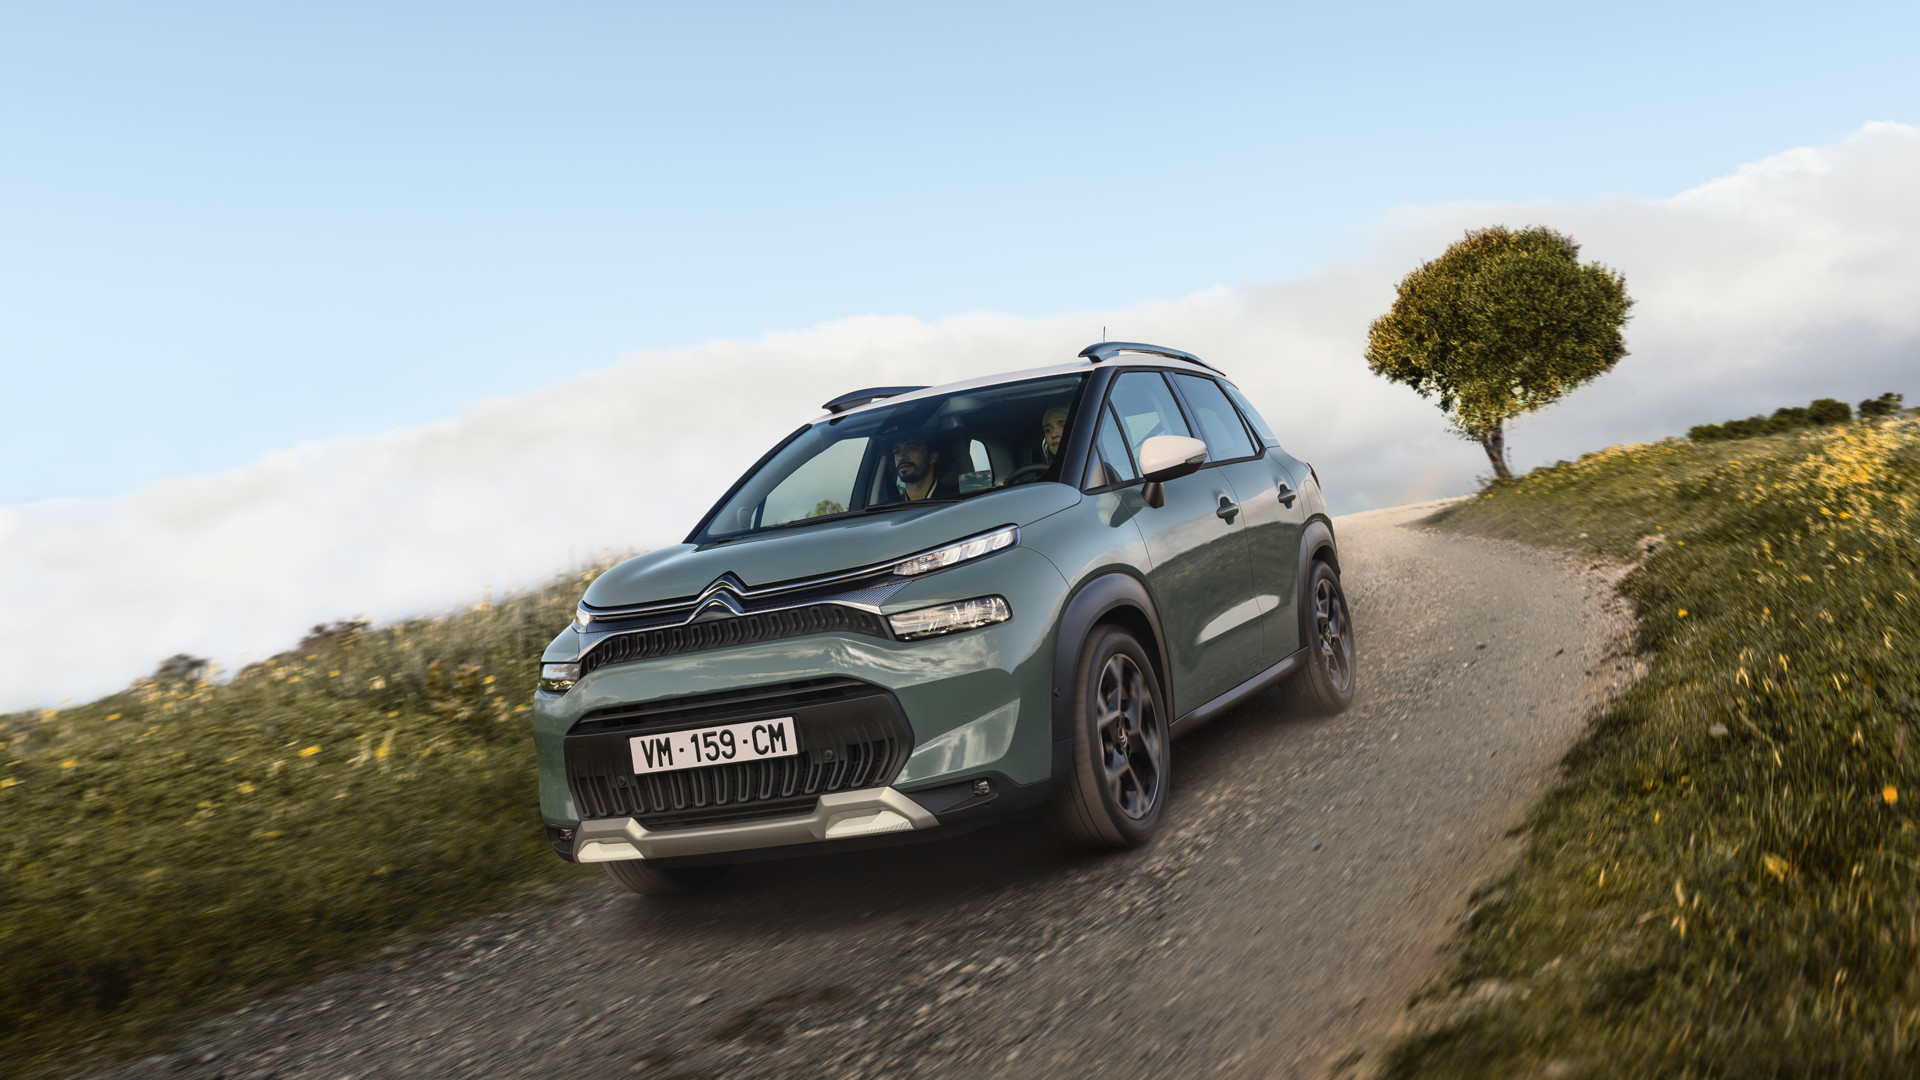 New Citroën C3 Aircross SUV arrives with an assertive new design and enhanced comfort